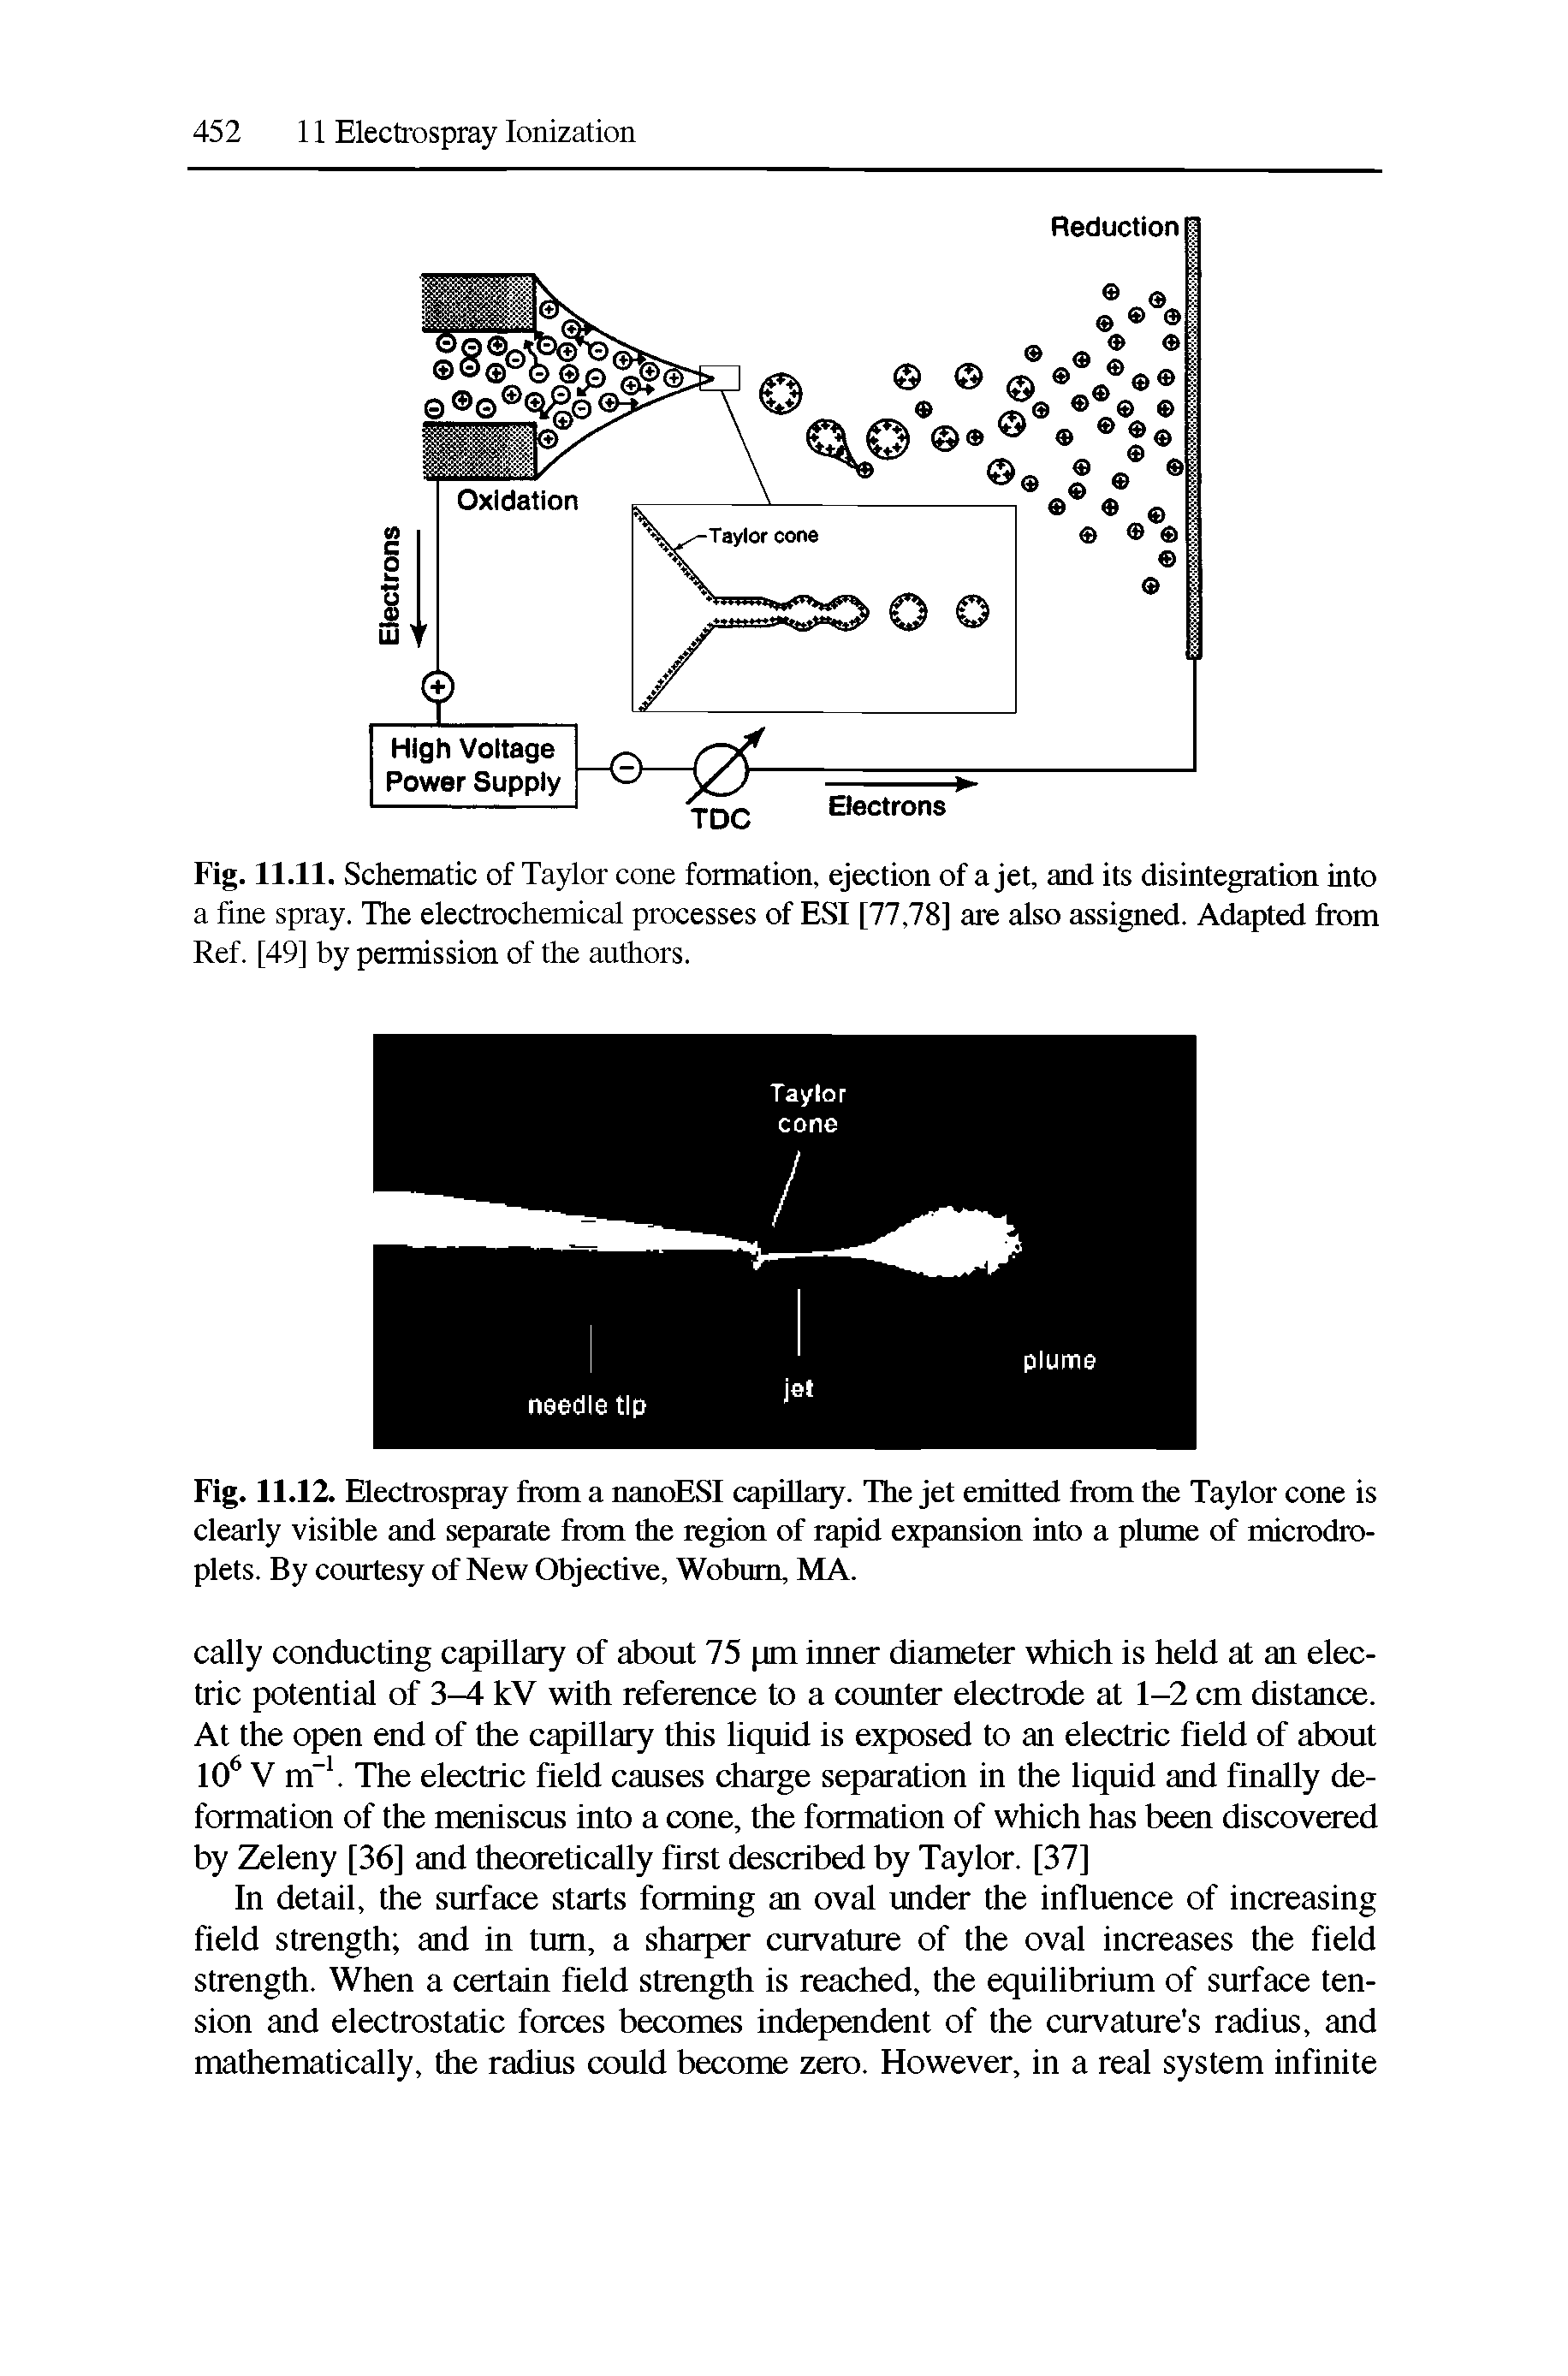 Fig. 11.11. Schematic of Taylor cone formation, ejection of a jet, and its disintegration into a fine spray. The electrochemical processes of ESI [77,78] are also assigned. Adapted from Ref. [49] by permission of the authors.